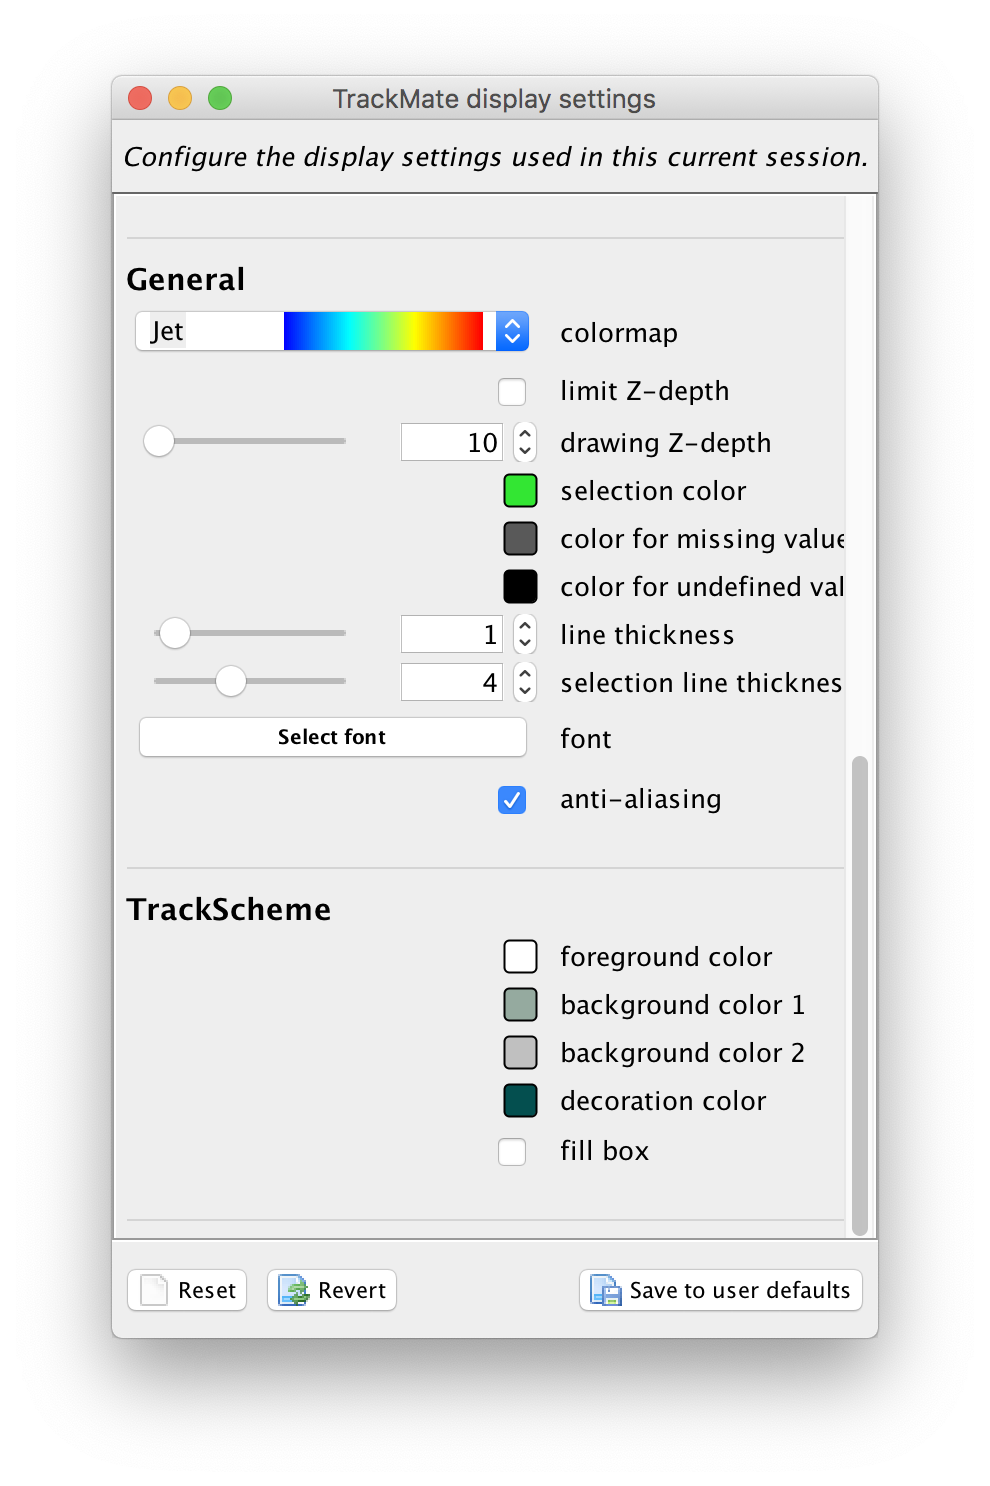 trackmate-display-settings-3.png